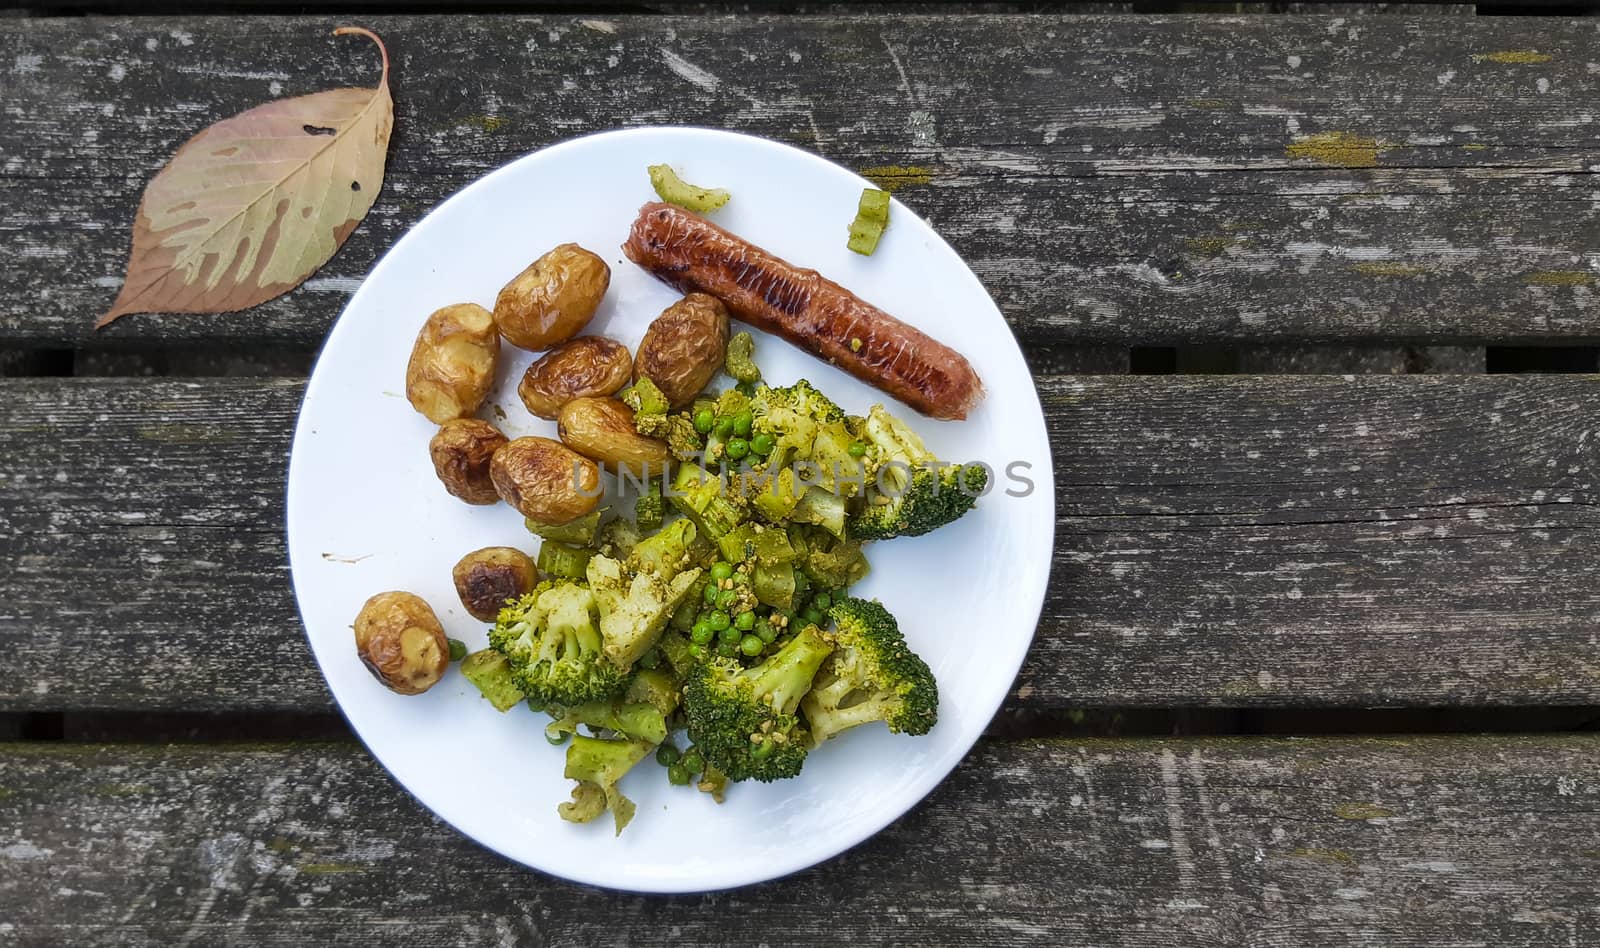 Vegan meal with oven baked potatos, plant based sausace, broccoli, peas and pesto on a white plate. by kb79